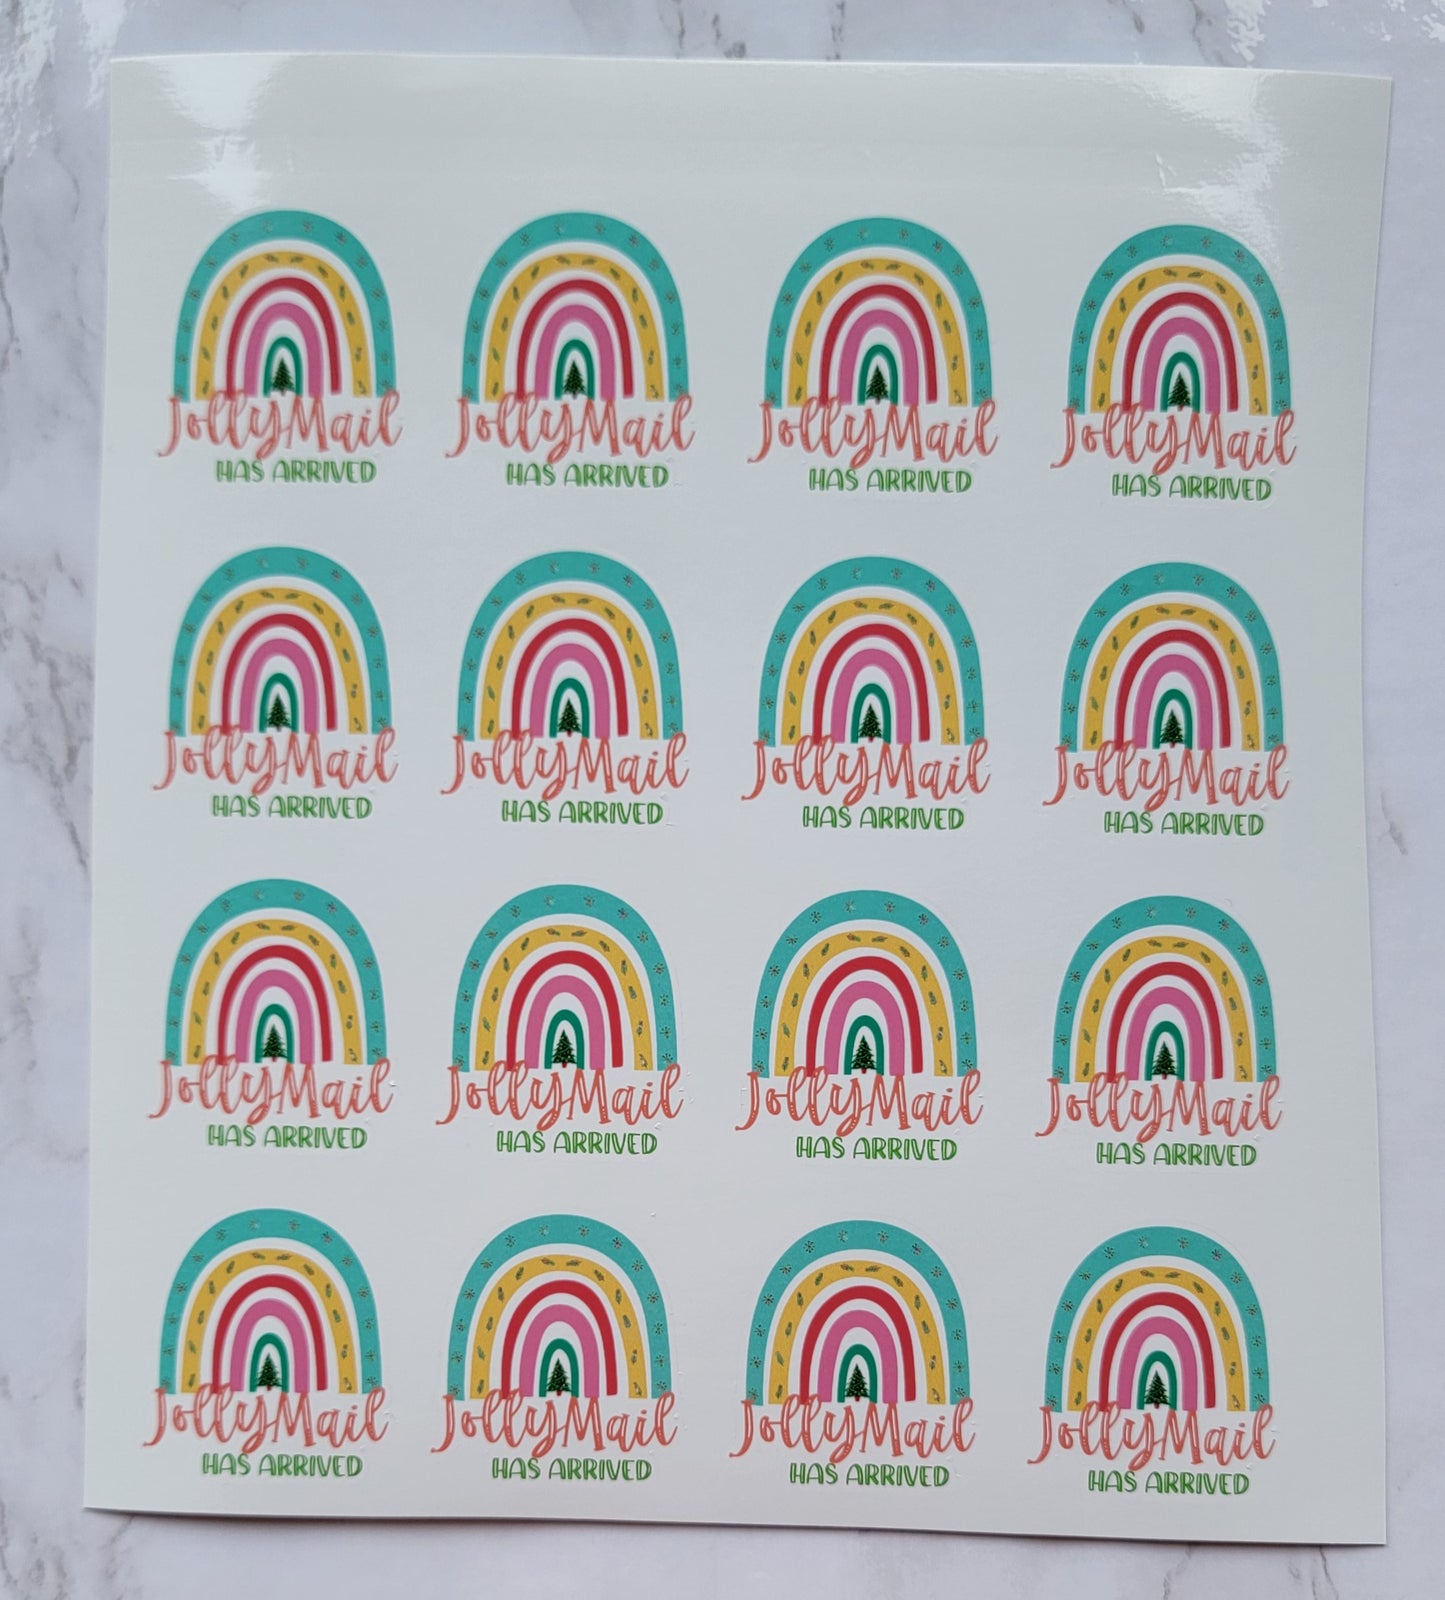 Christmas Theme - Assorted Rainbow - "Jolly Mail Has Arrived" - Waterproof Sticker Sheet